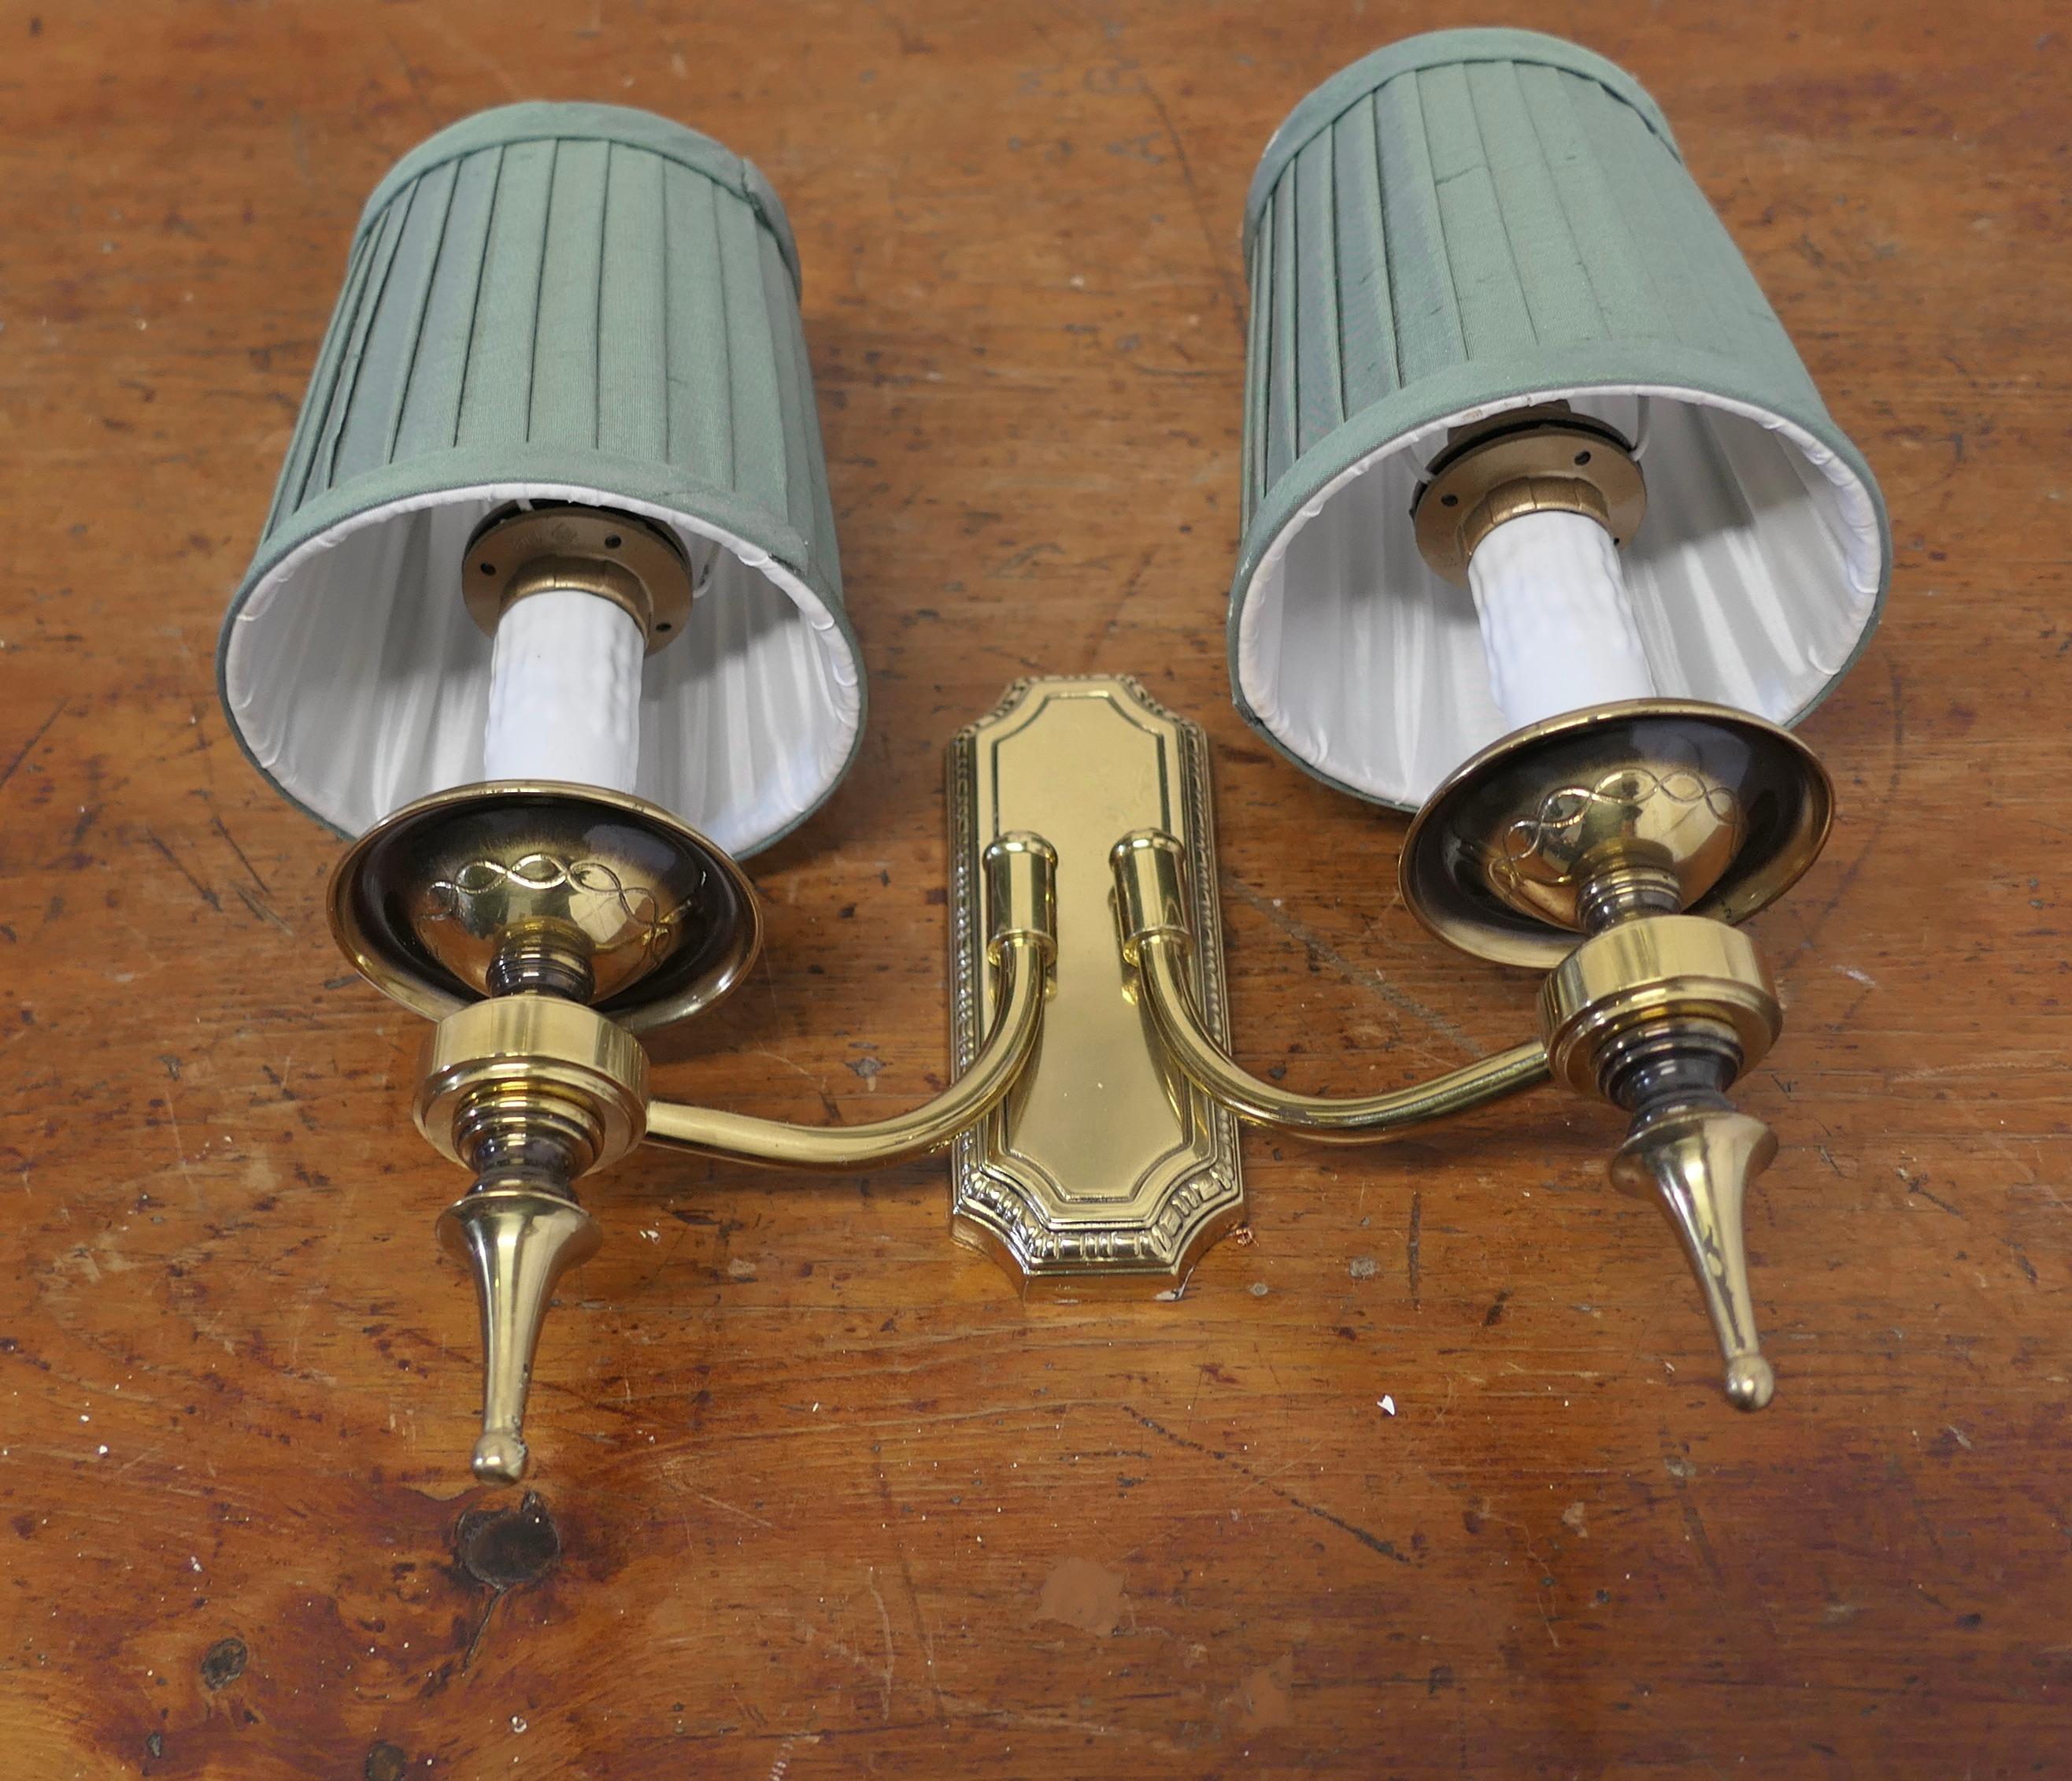 A Set of 4 Twin Wall Lights  A very handsome set of 4 double wall lights  4